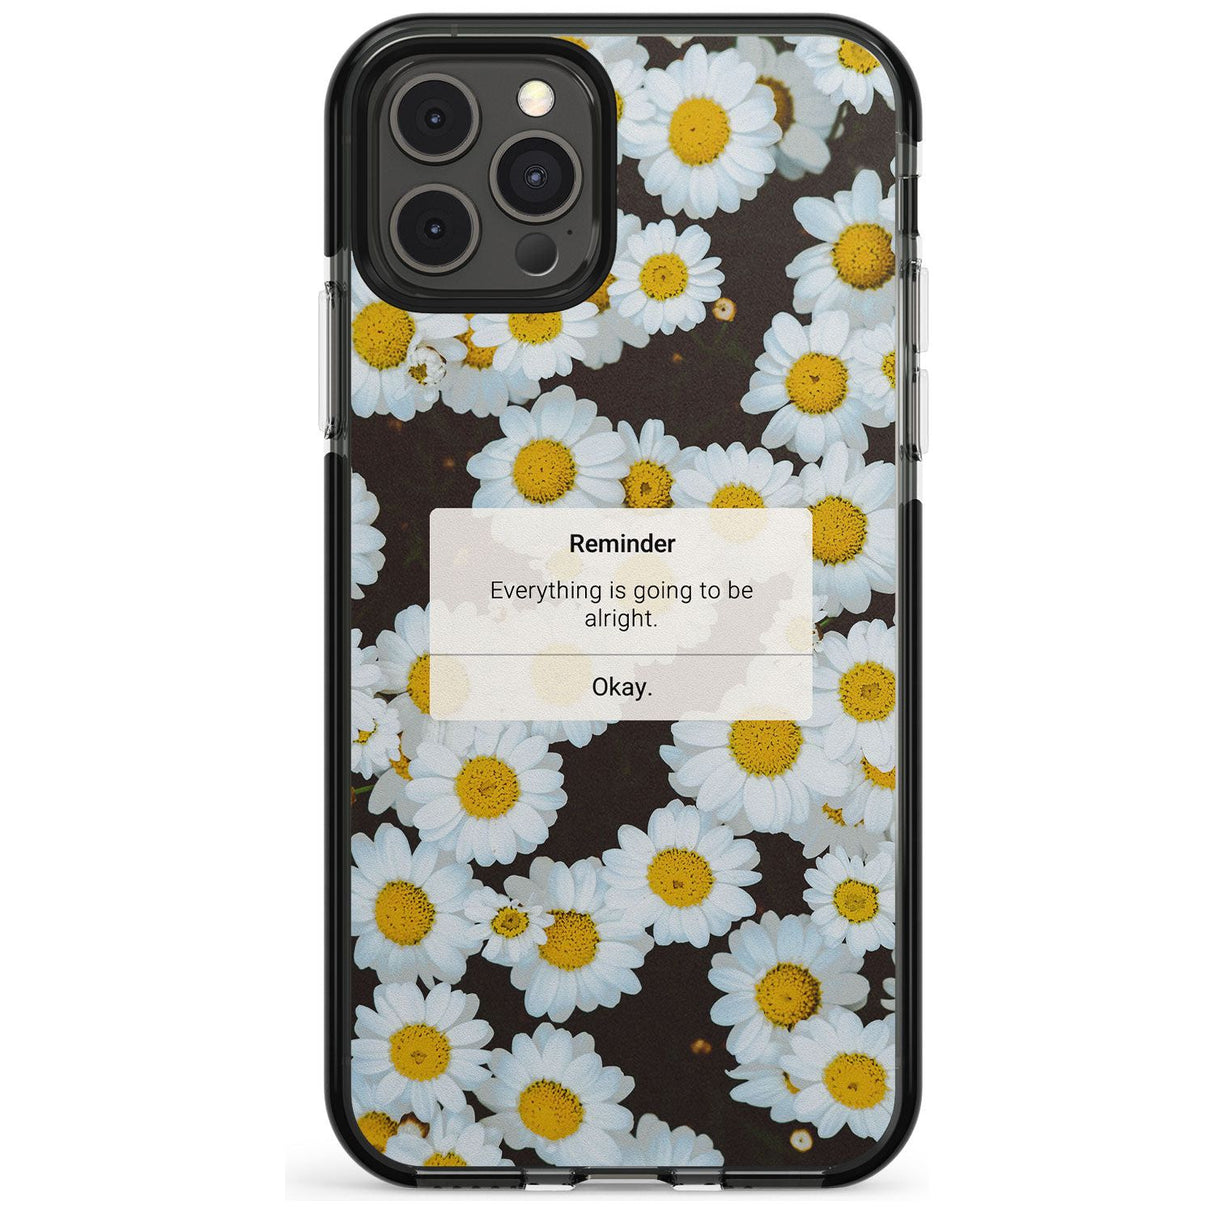 "Everything will be alright" iPhone Reminder Pink Fade Impact Phone Case for iPhone 11